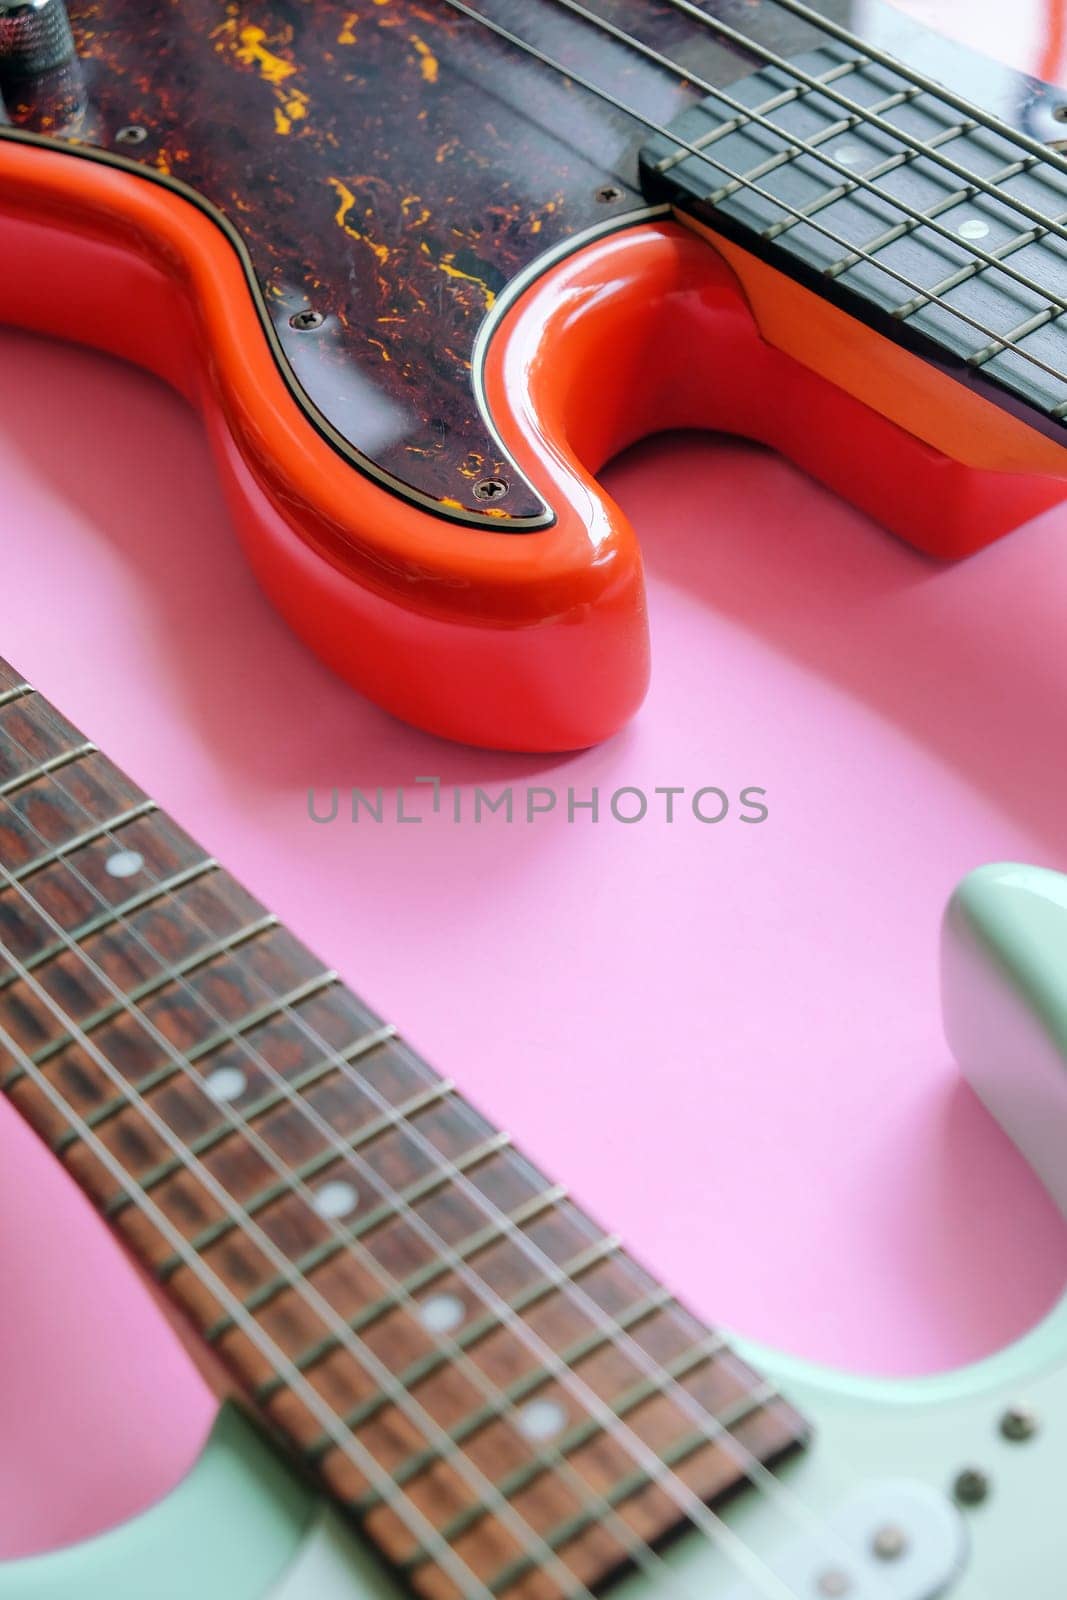 Electric guitar and bass guitar on a pink background with copy space.